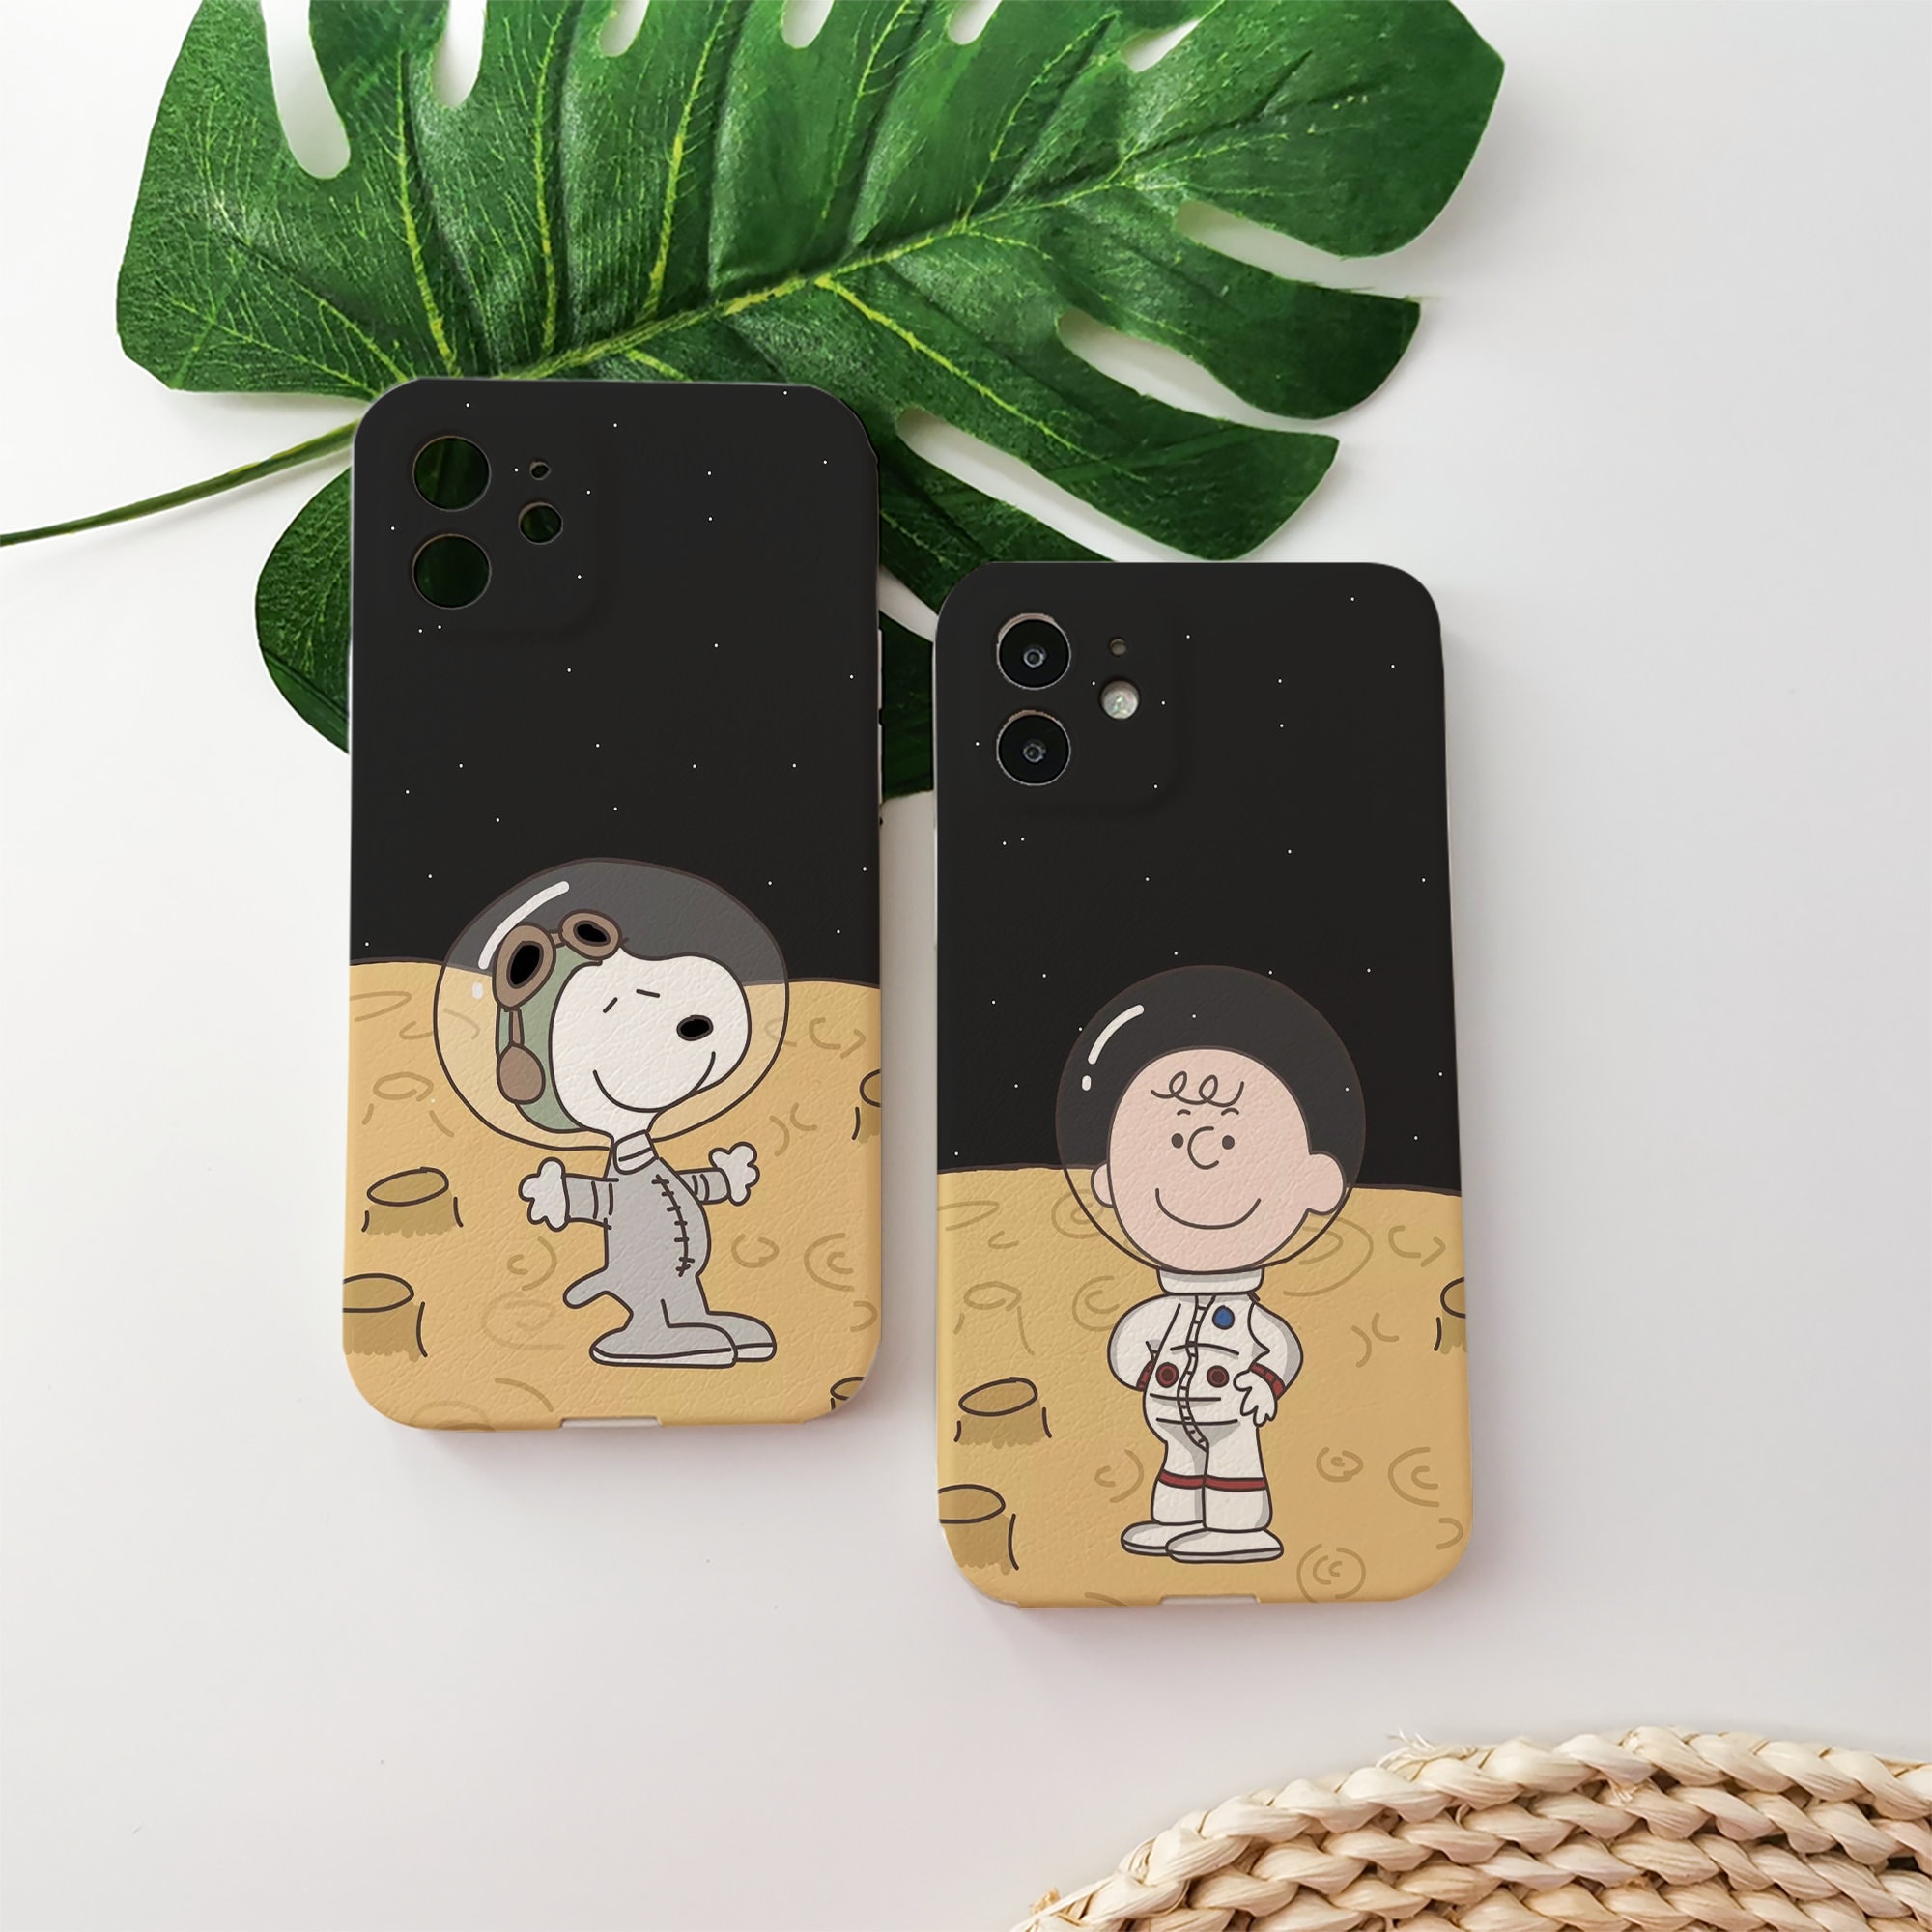 Discover Cute Cartoon Snoopy Couple Leather Phone Case Cover For iPhone 13/12/11 Pro Max, Xs, 7, 8, SE, XR